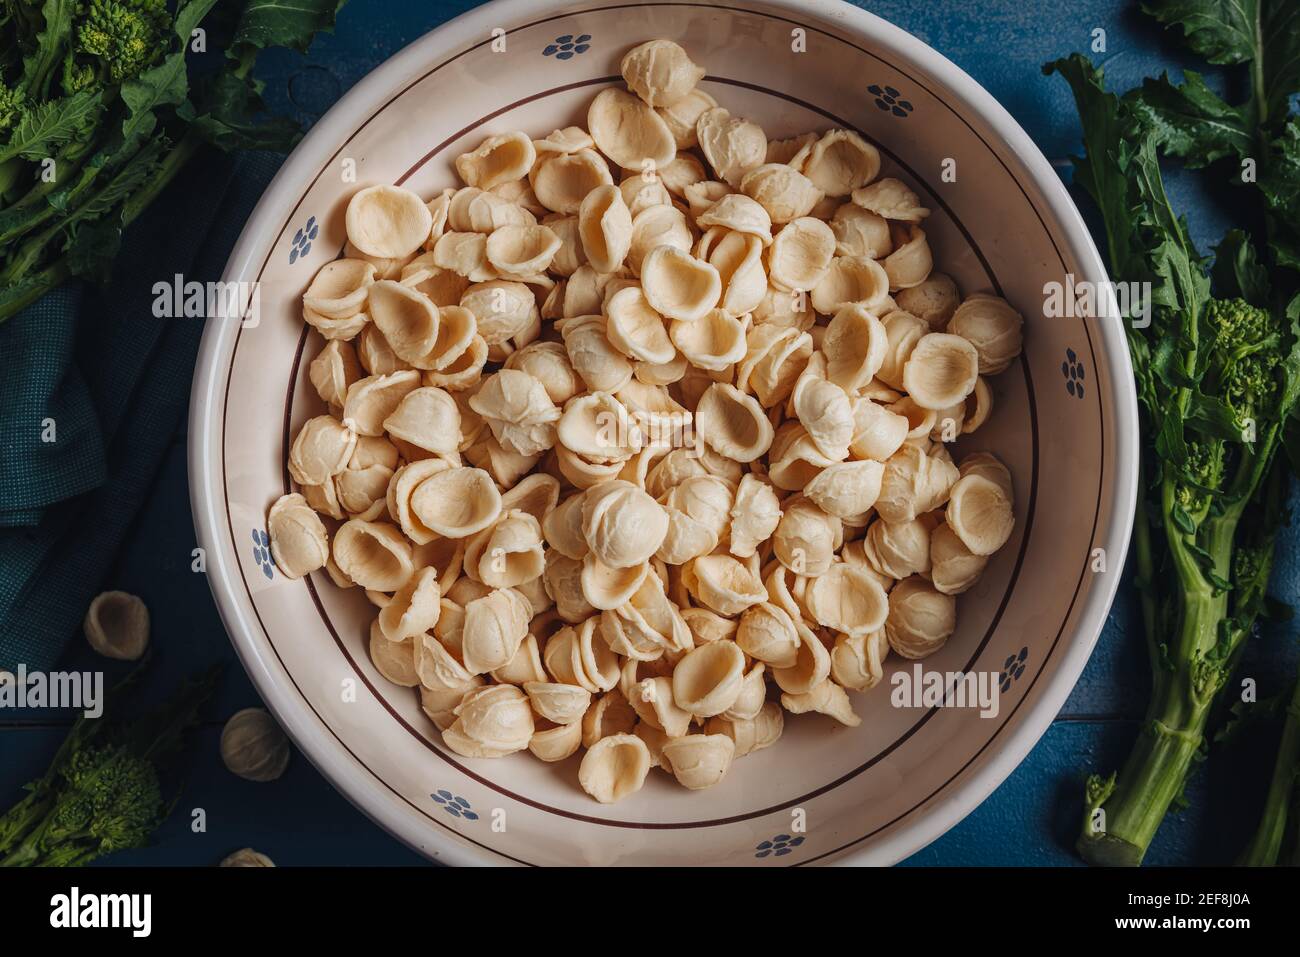 Traditional apulian dish with orecchiette shaped pasta and turnip tops vegetables Stock Photo